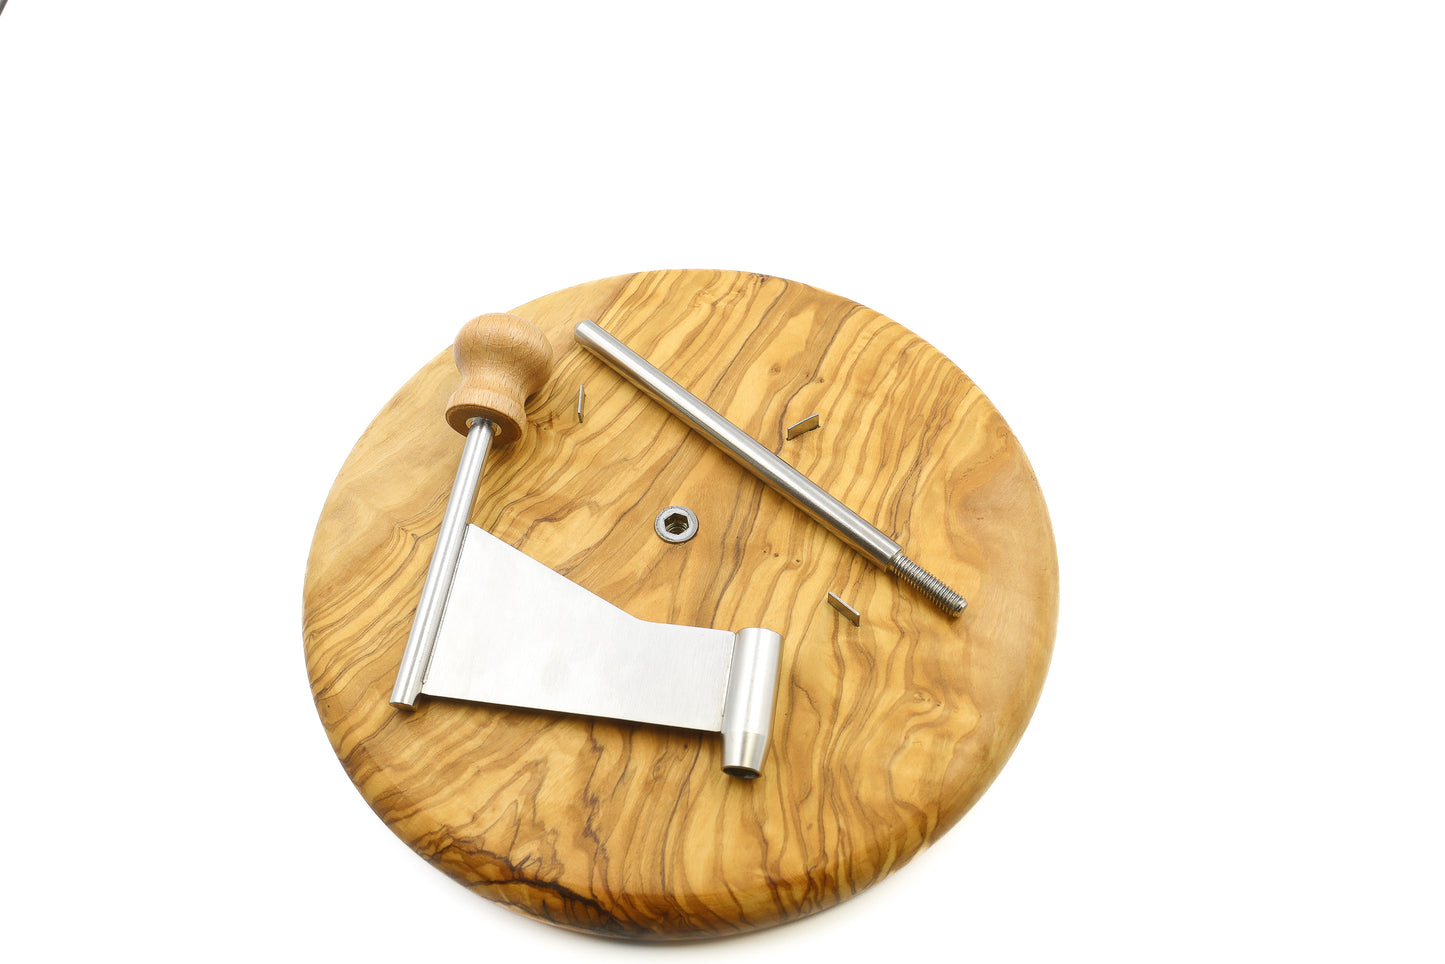 Olive wood cheese board with stainless steel platter, cheese shaver